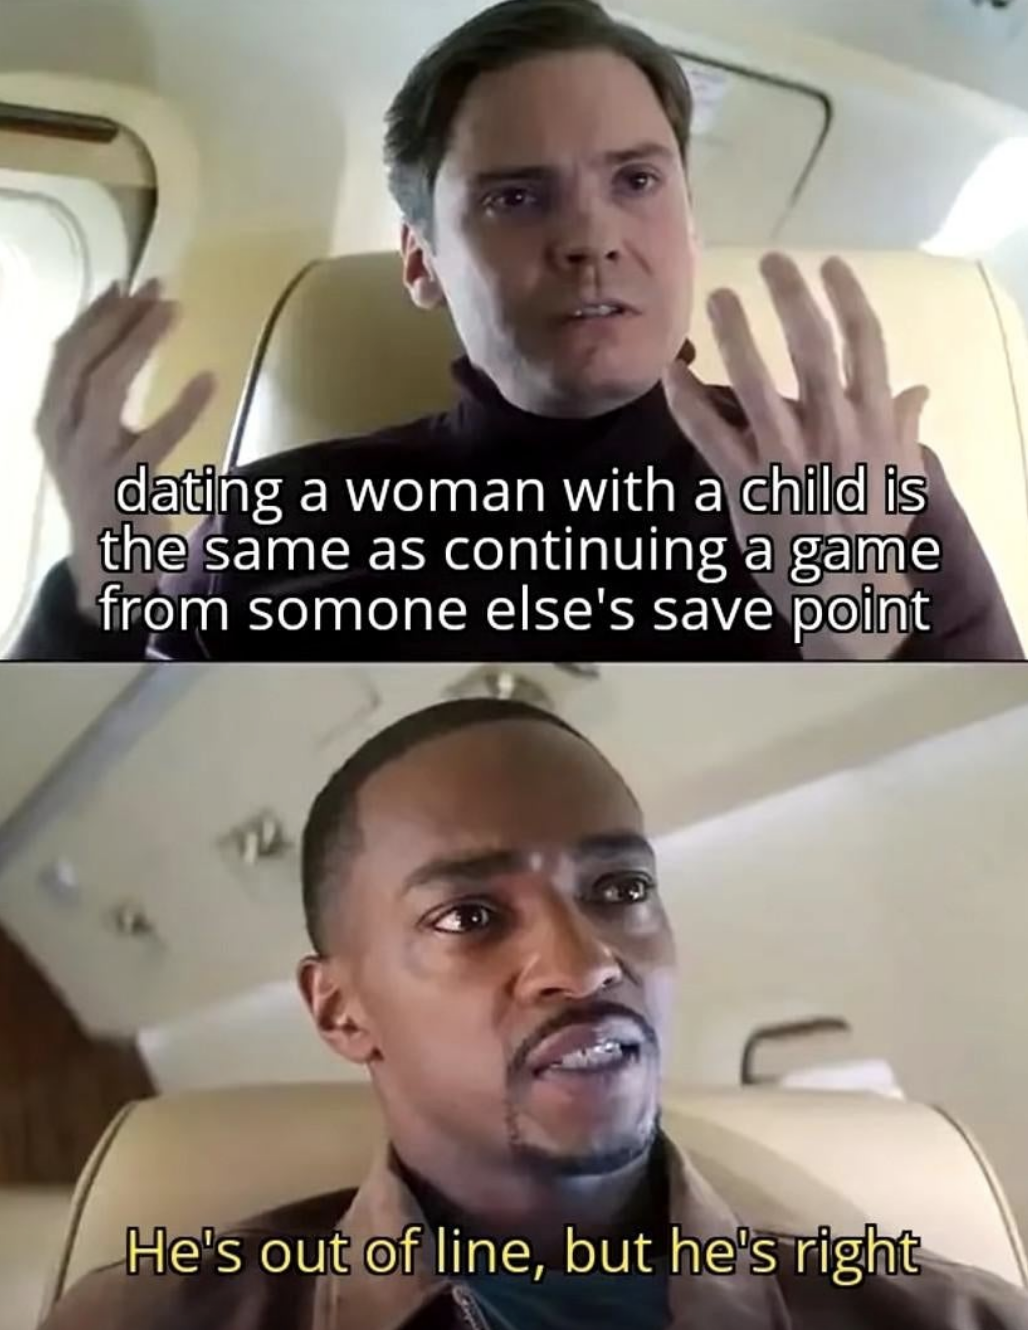 &quot;dating a woman with a child is like continuing a game from someone else&#x27;s save point&quot;